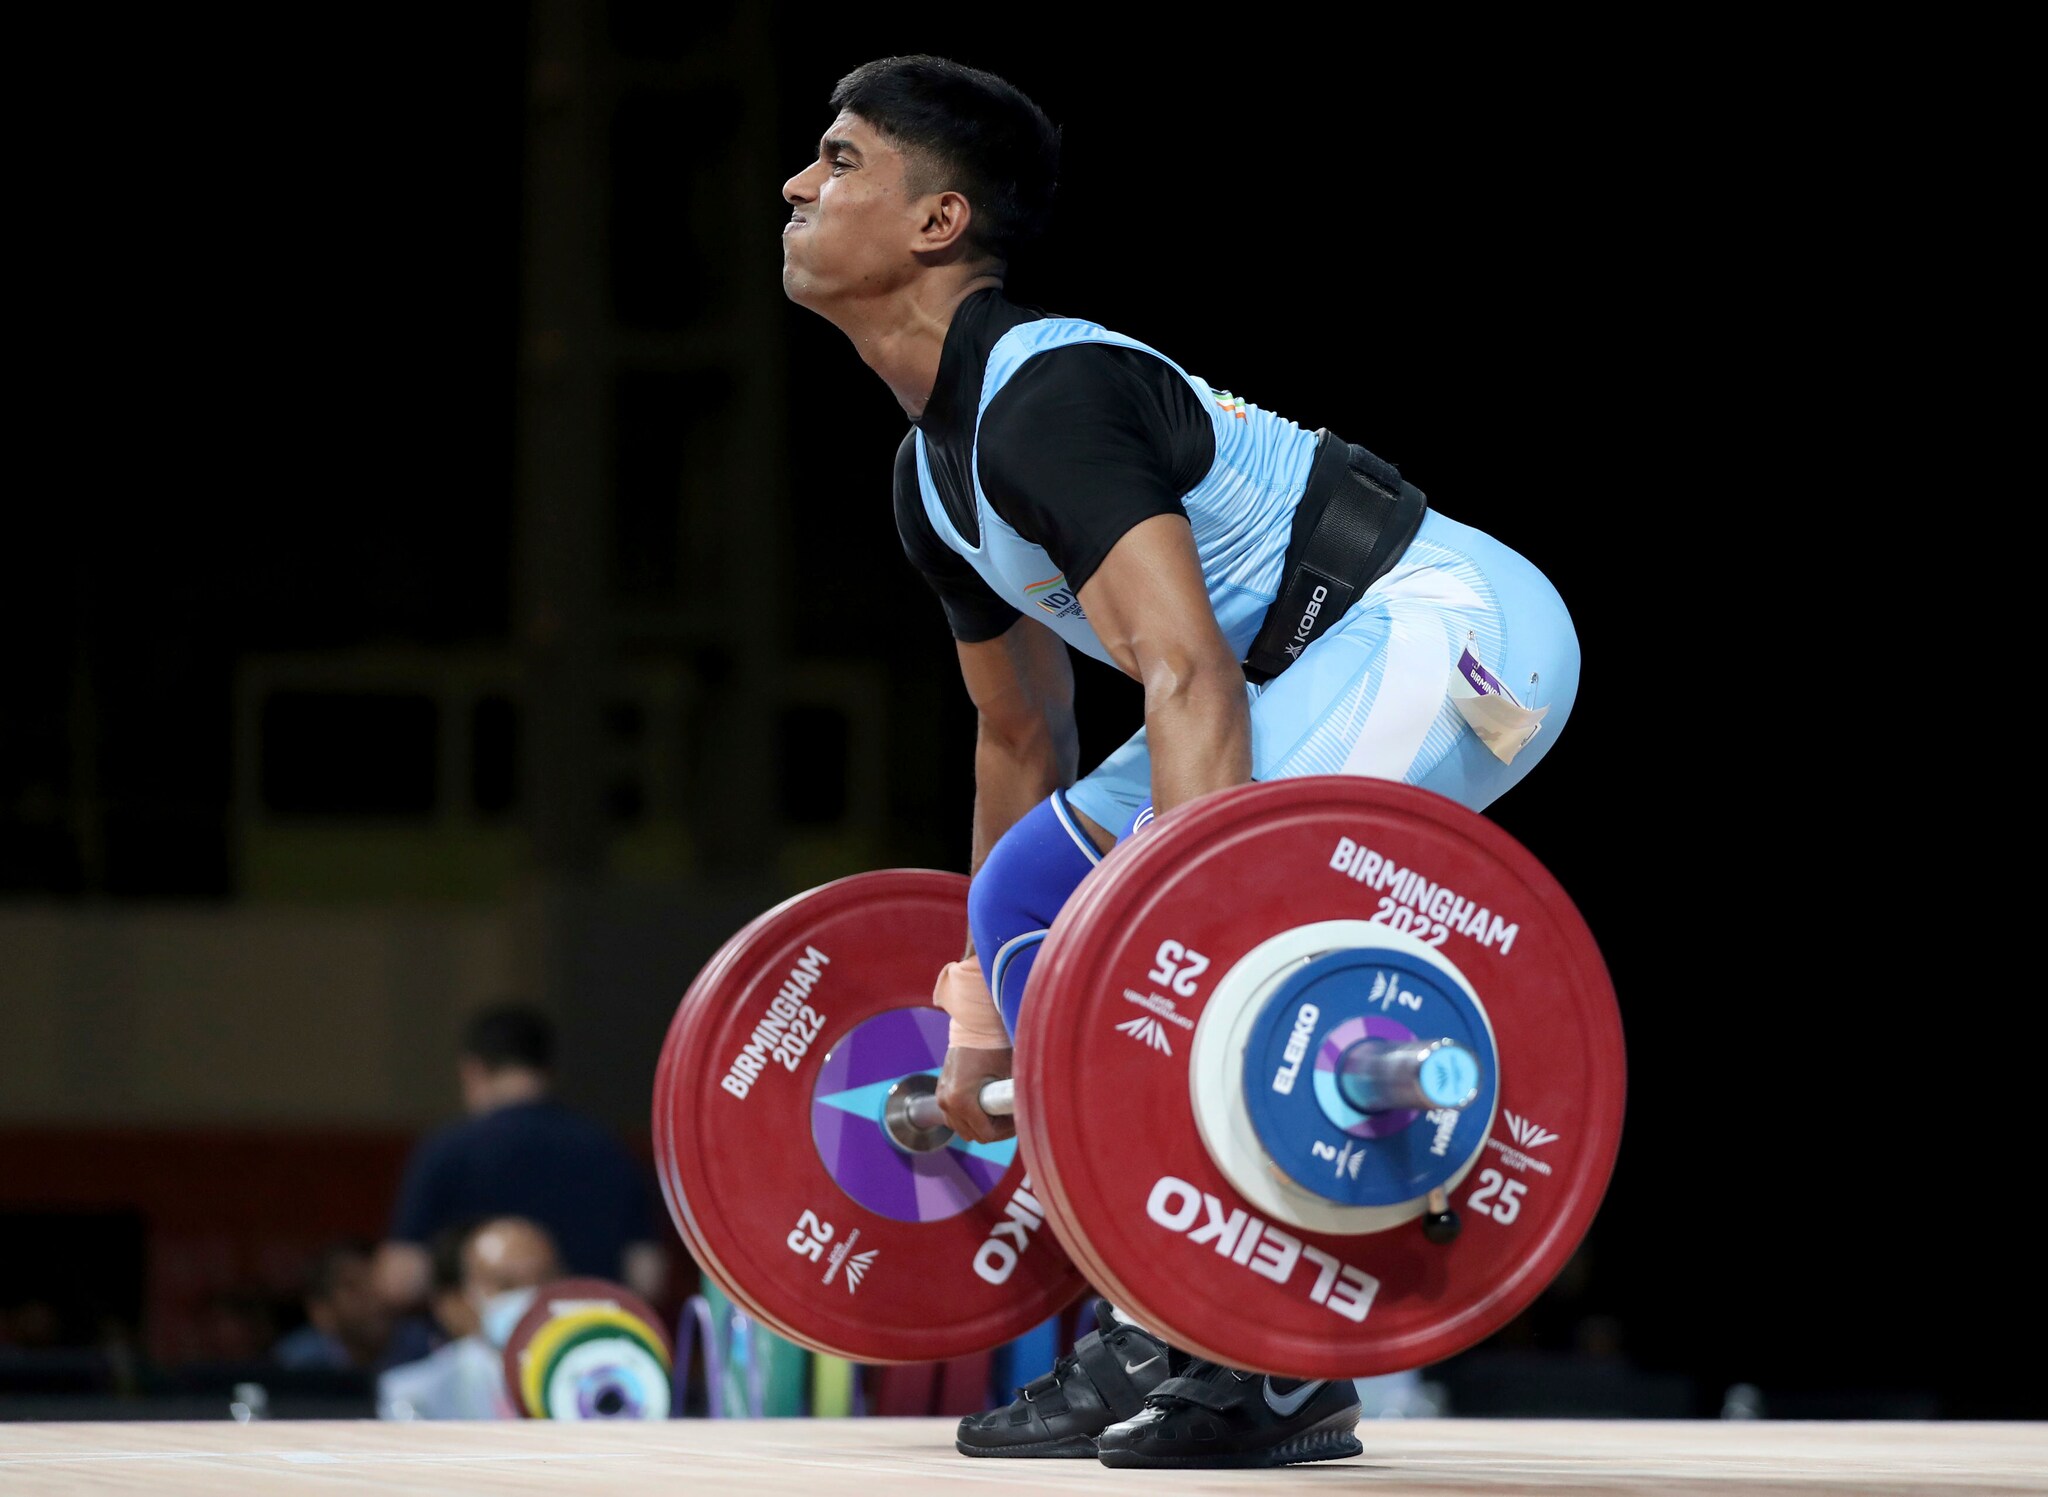 CWG 2022 India Day 2 in Pictures Weightlifters Clinch 4 Medals as Badminton and Womens Hockey Team Get Wins